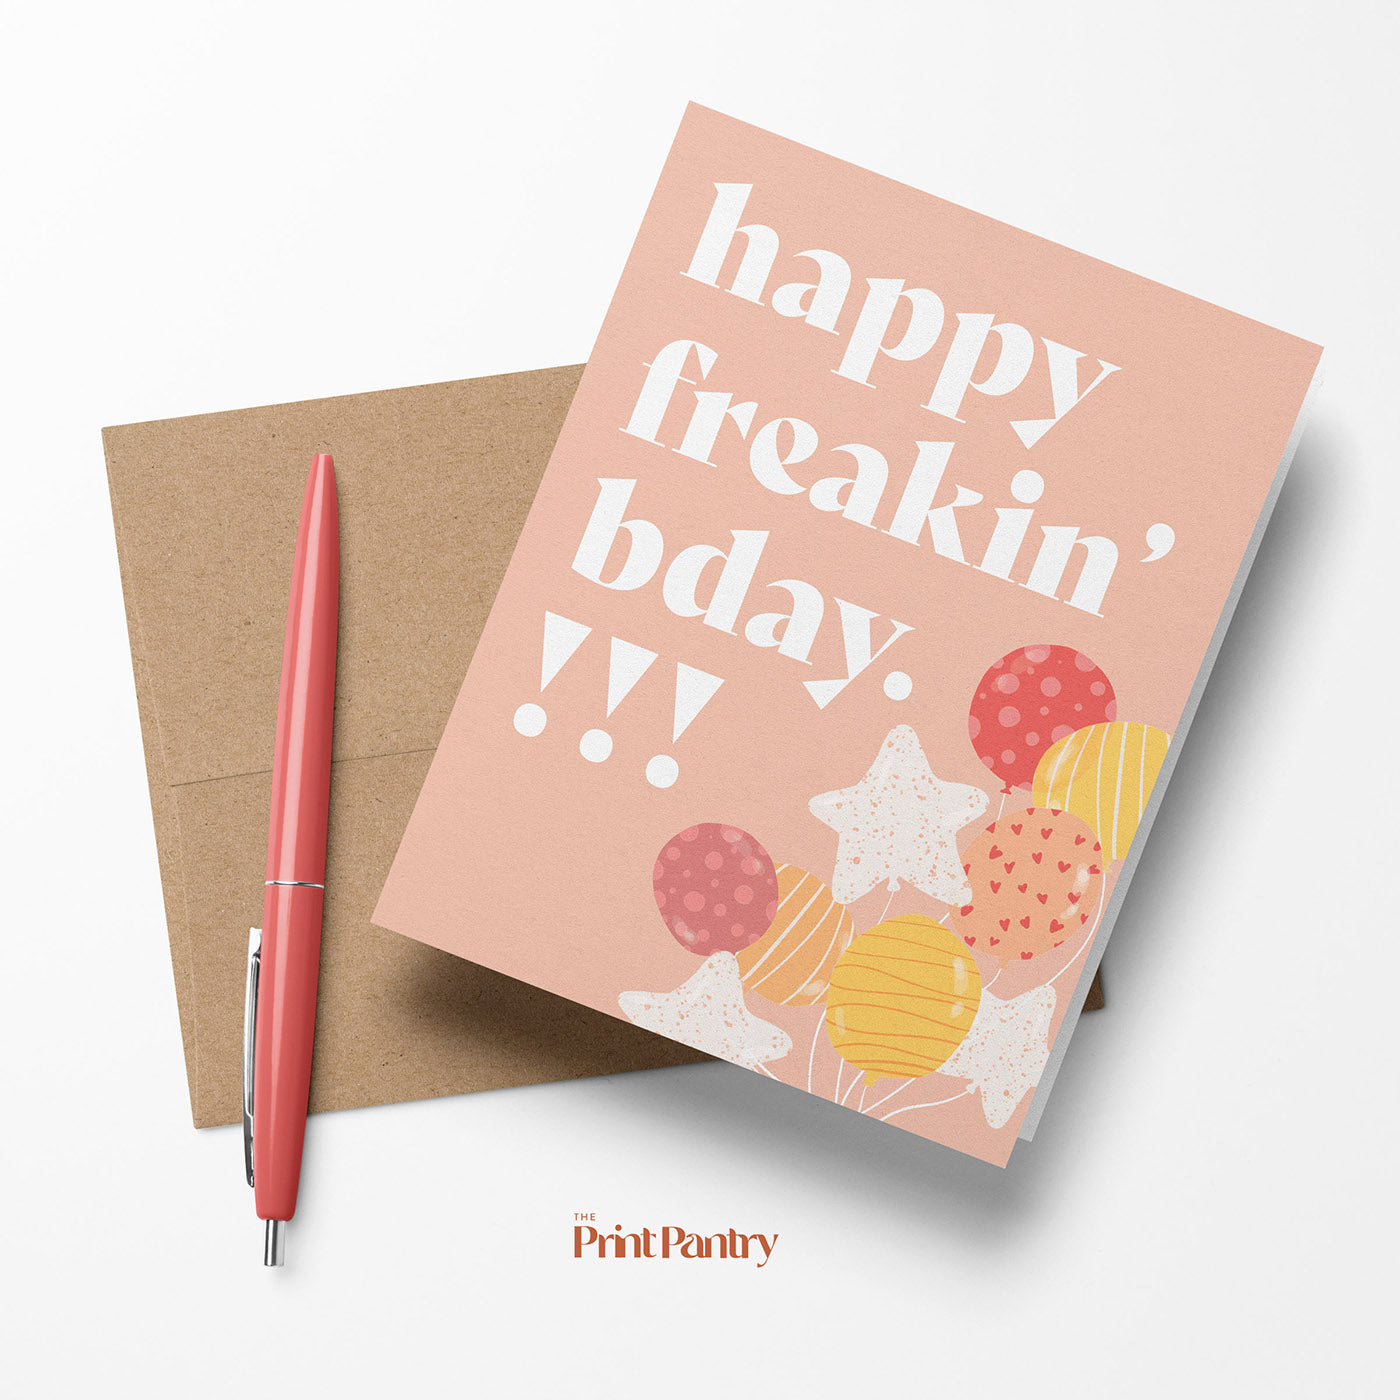 Happy Freakin' Birthday Greeting Card laying on a Kraft paper envelope with a pen